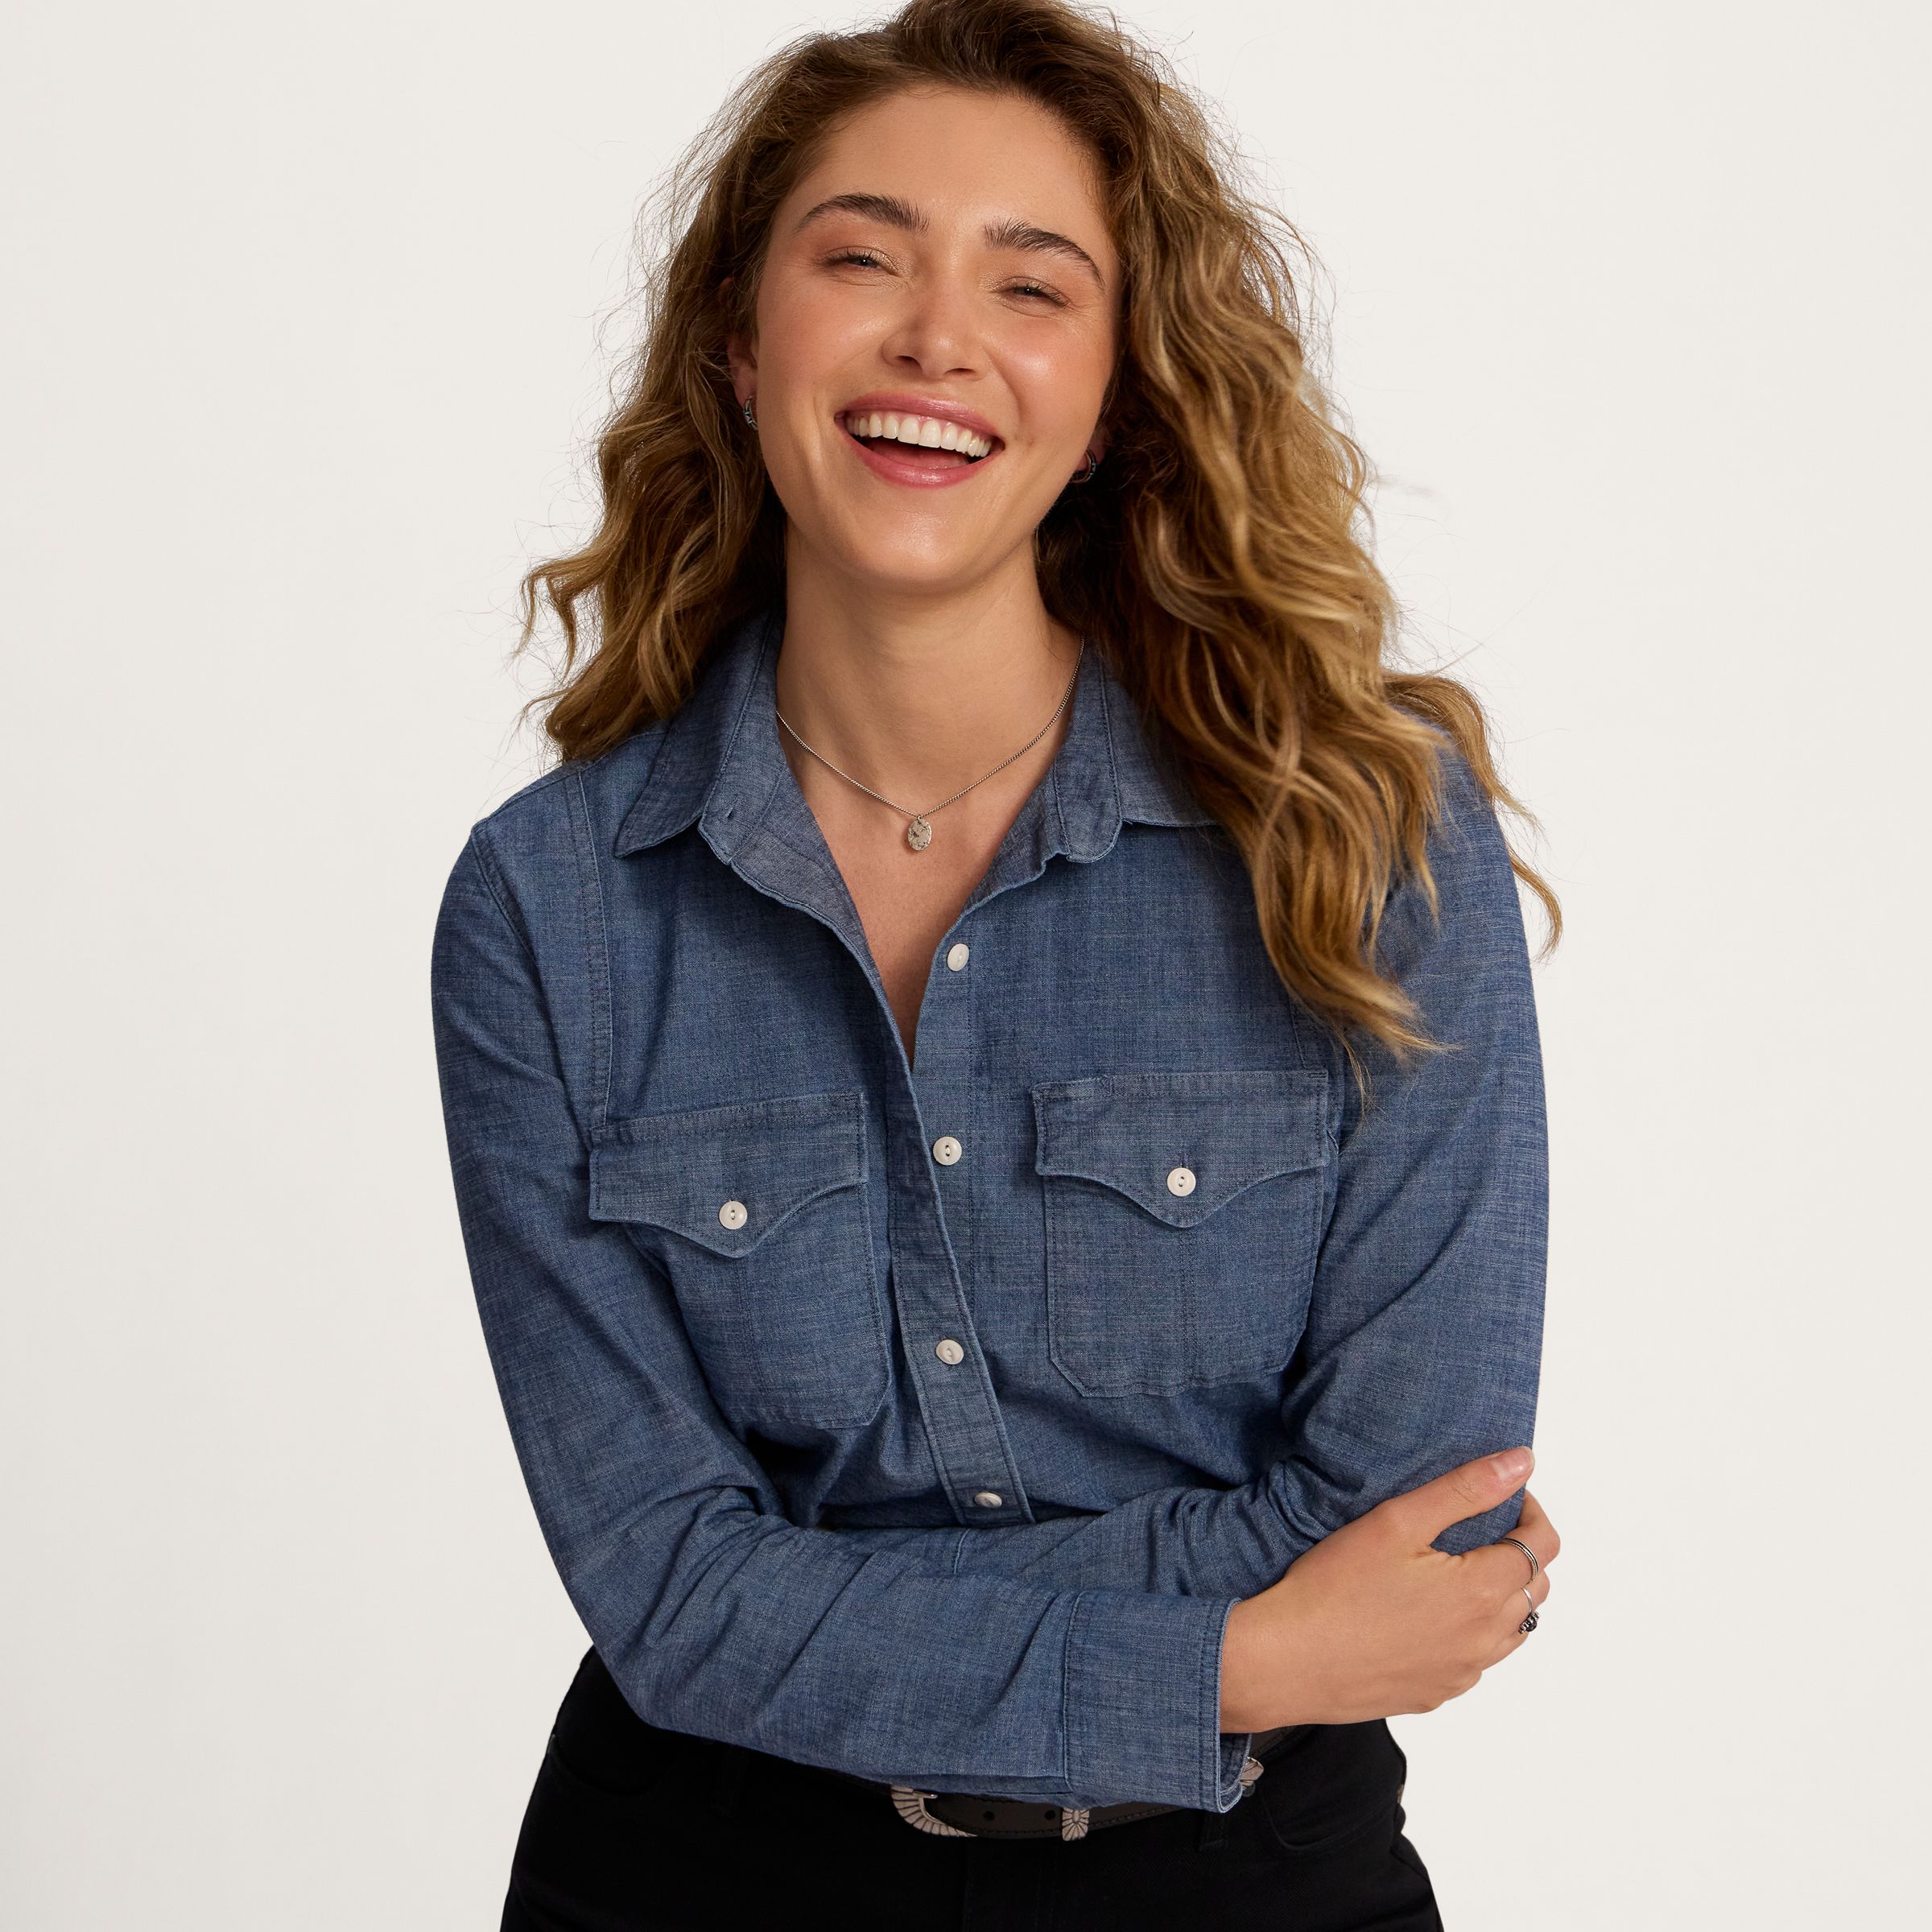 Modish Denim Shirts For Women: Boost Your Style Quotient